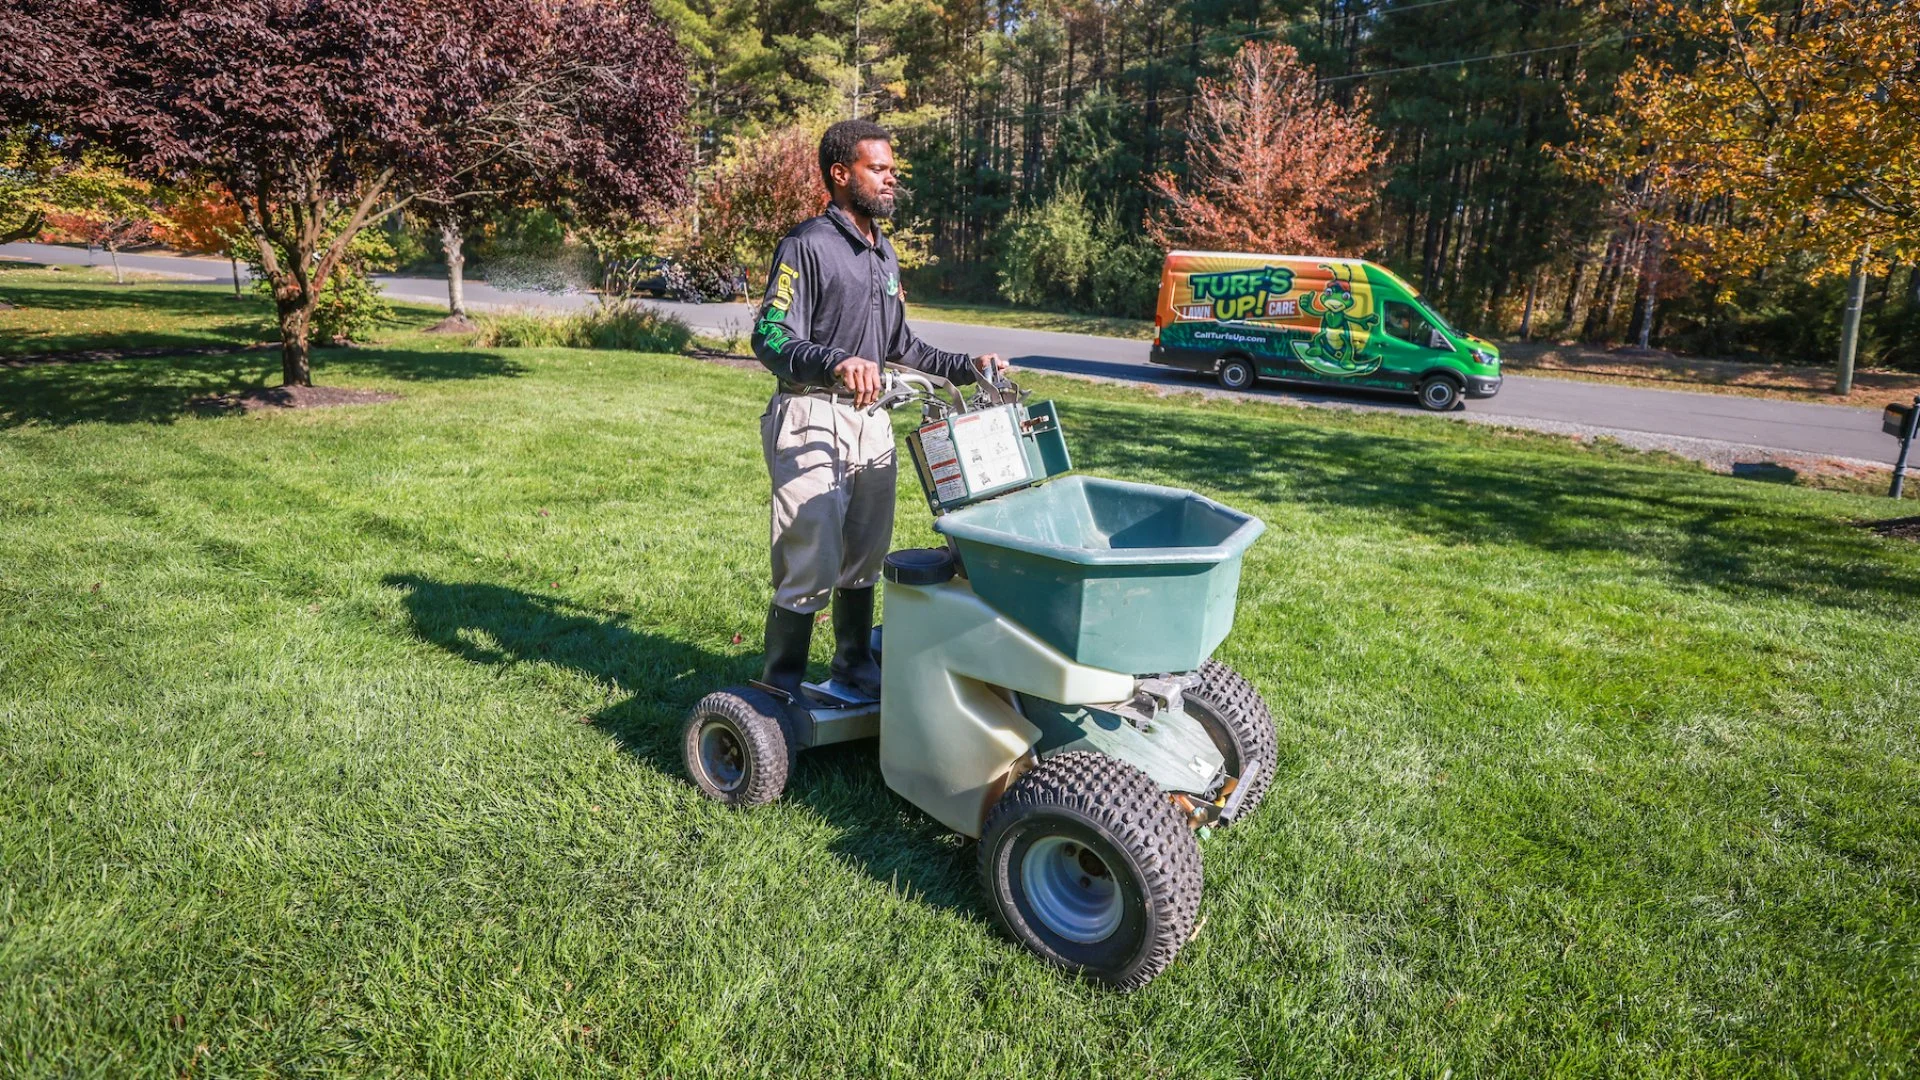 Turf's Up Lawn Care employee working.